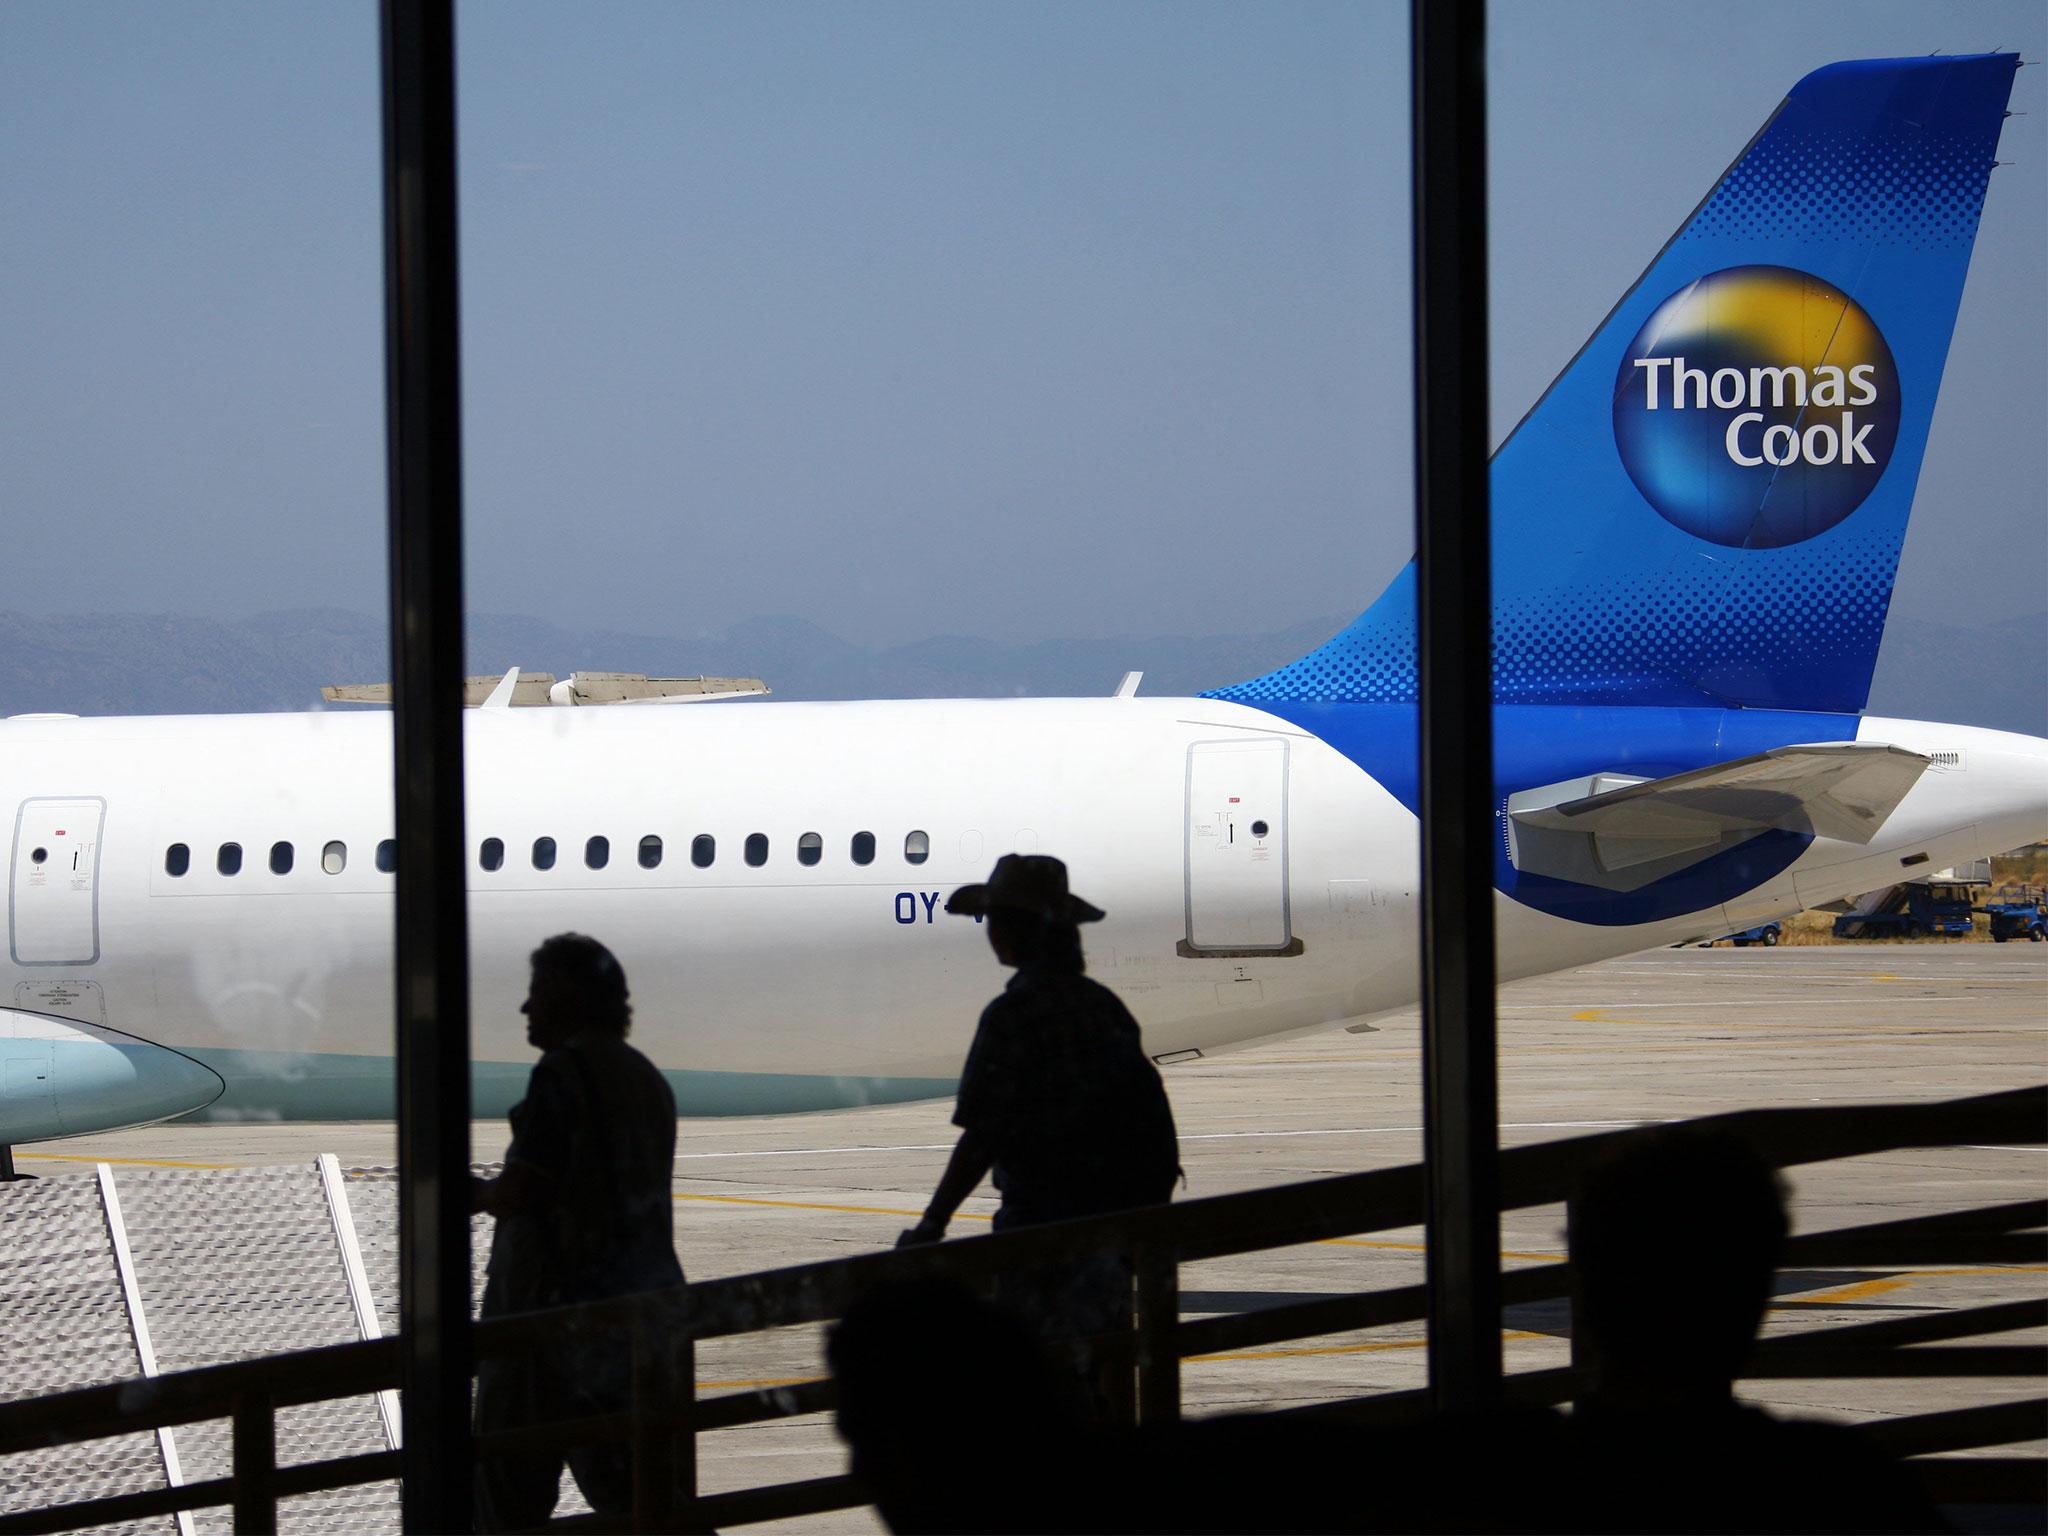 Thomas Cook requested an apology from AQA for painting the company in a bad light